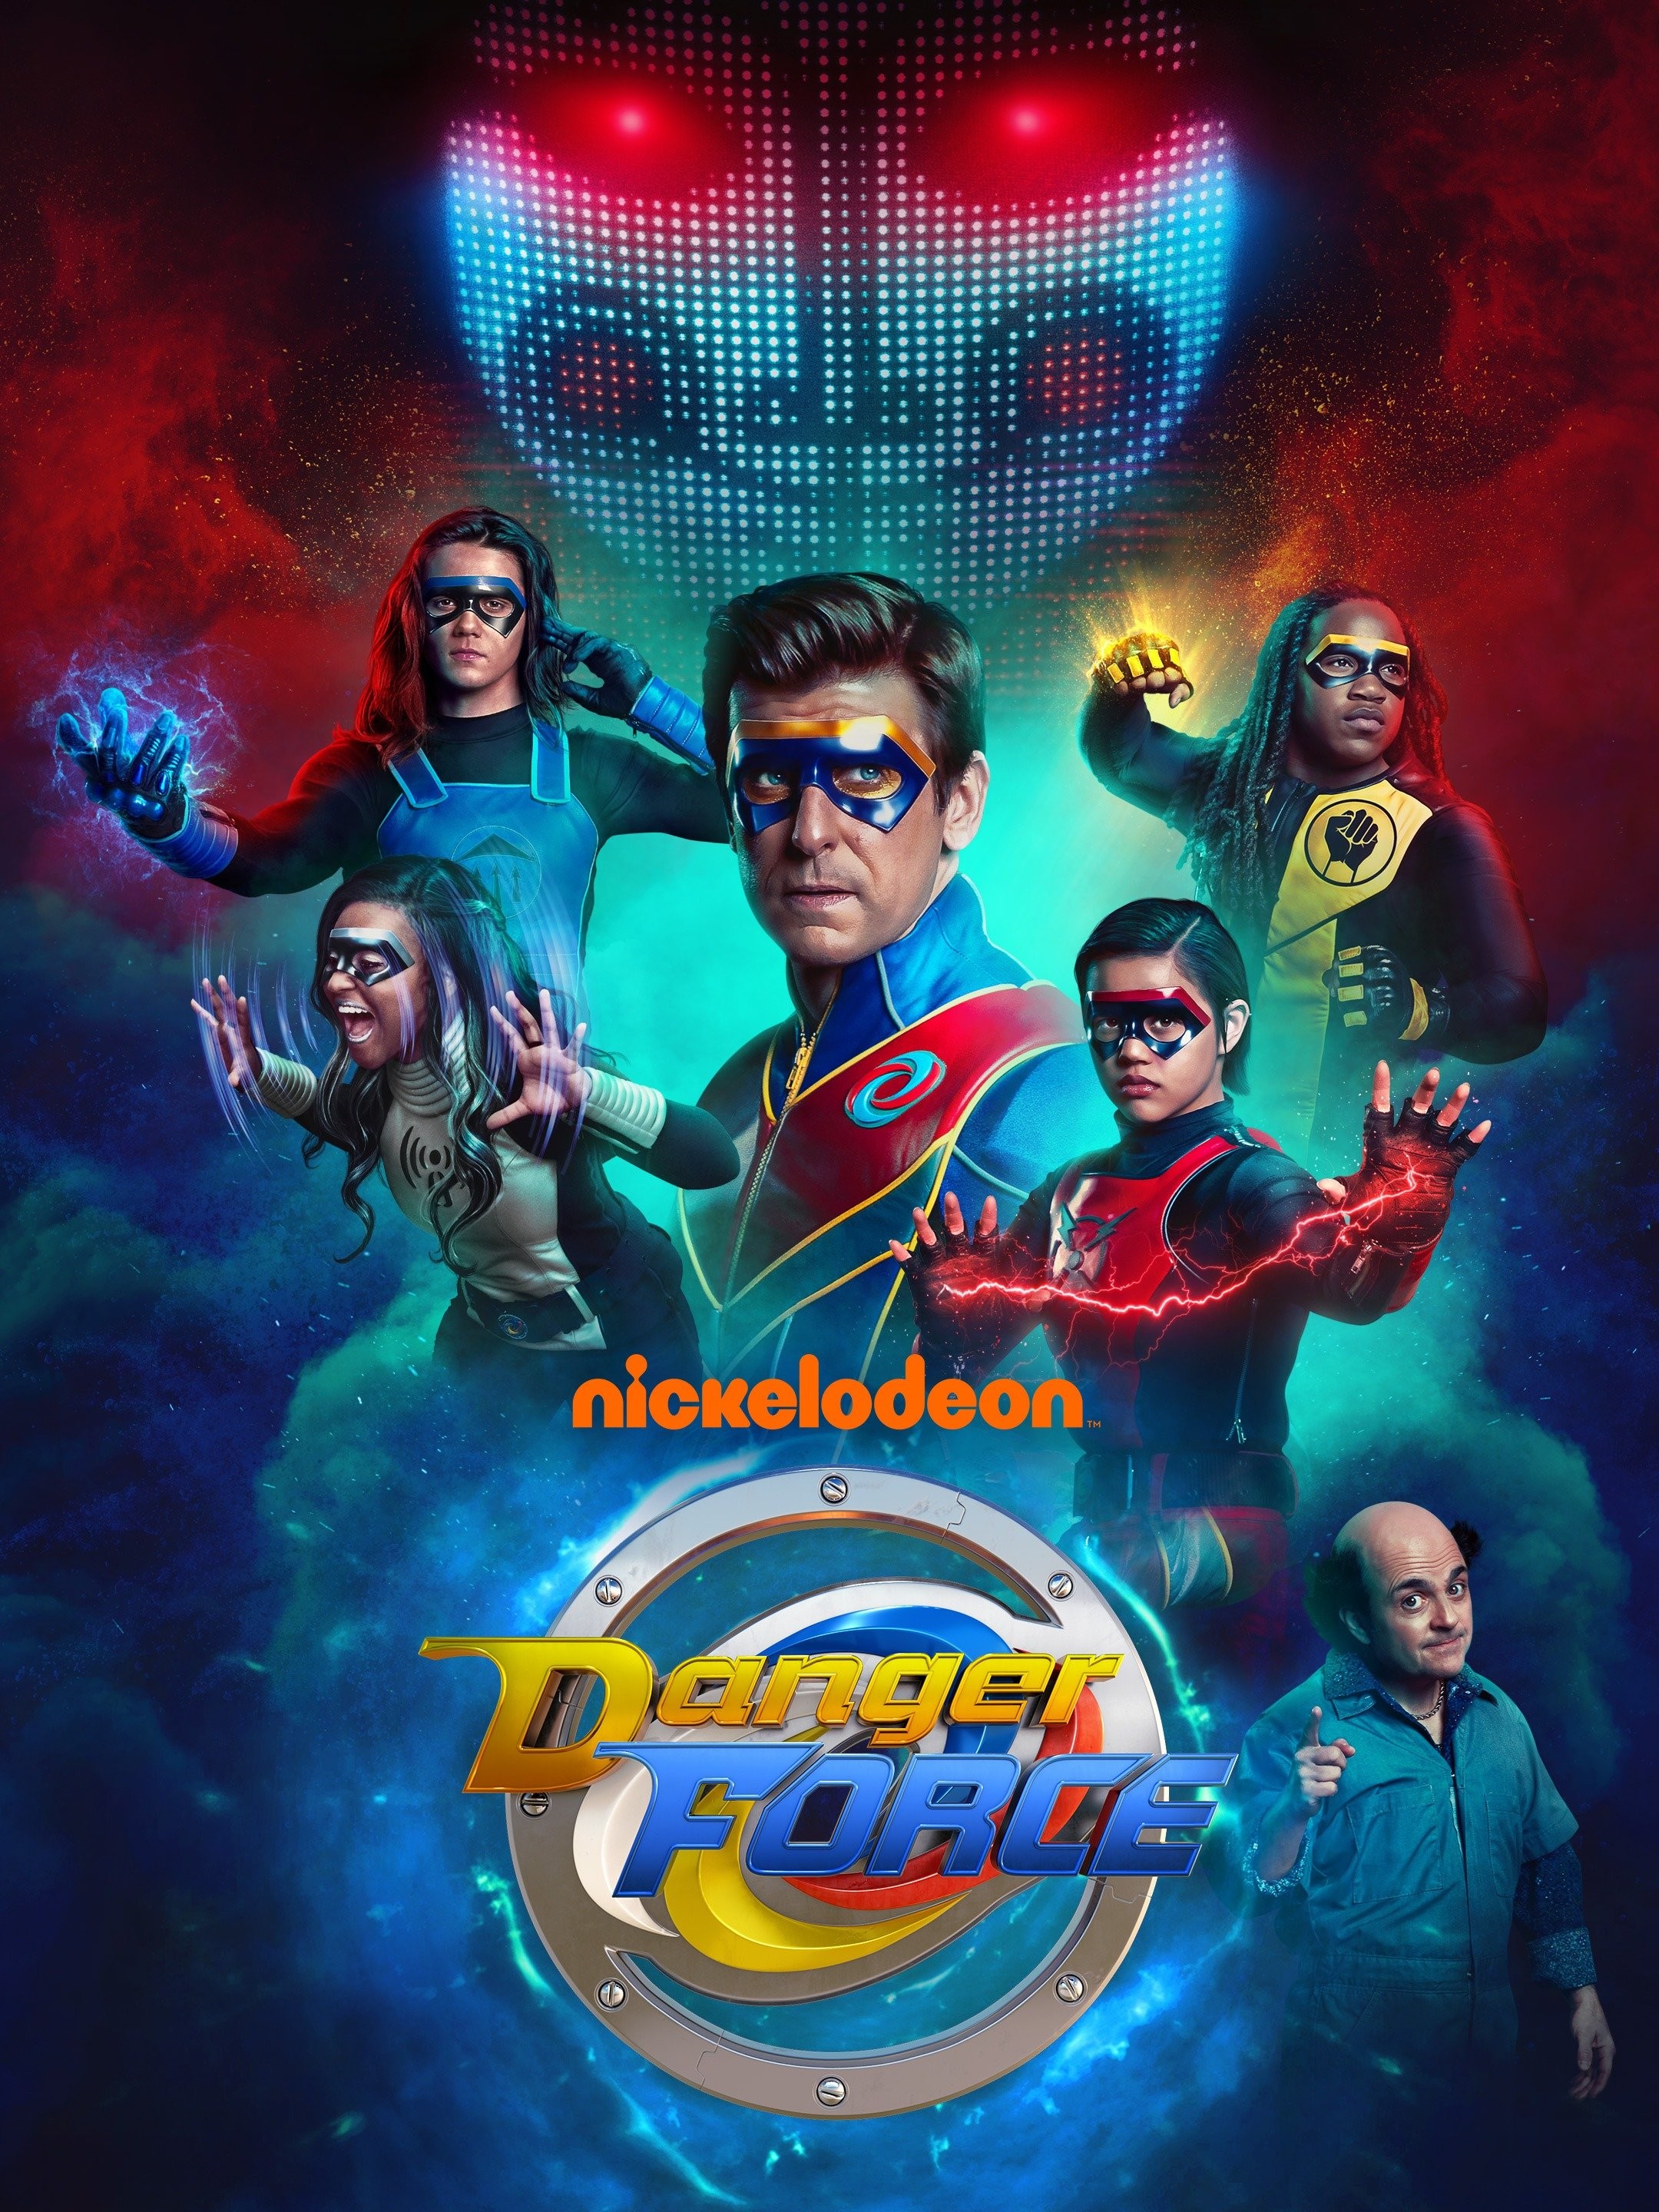 Joe Danger: The Movie will end the series – XBLAFans